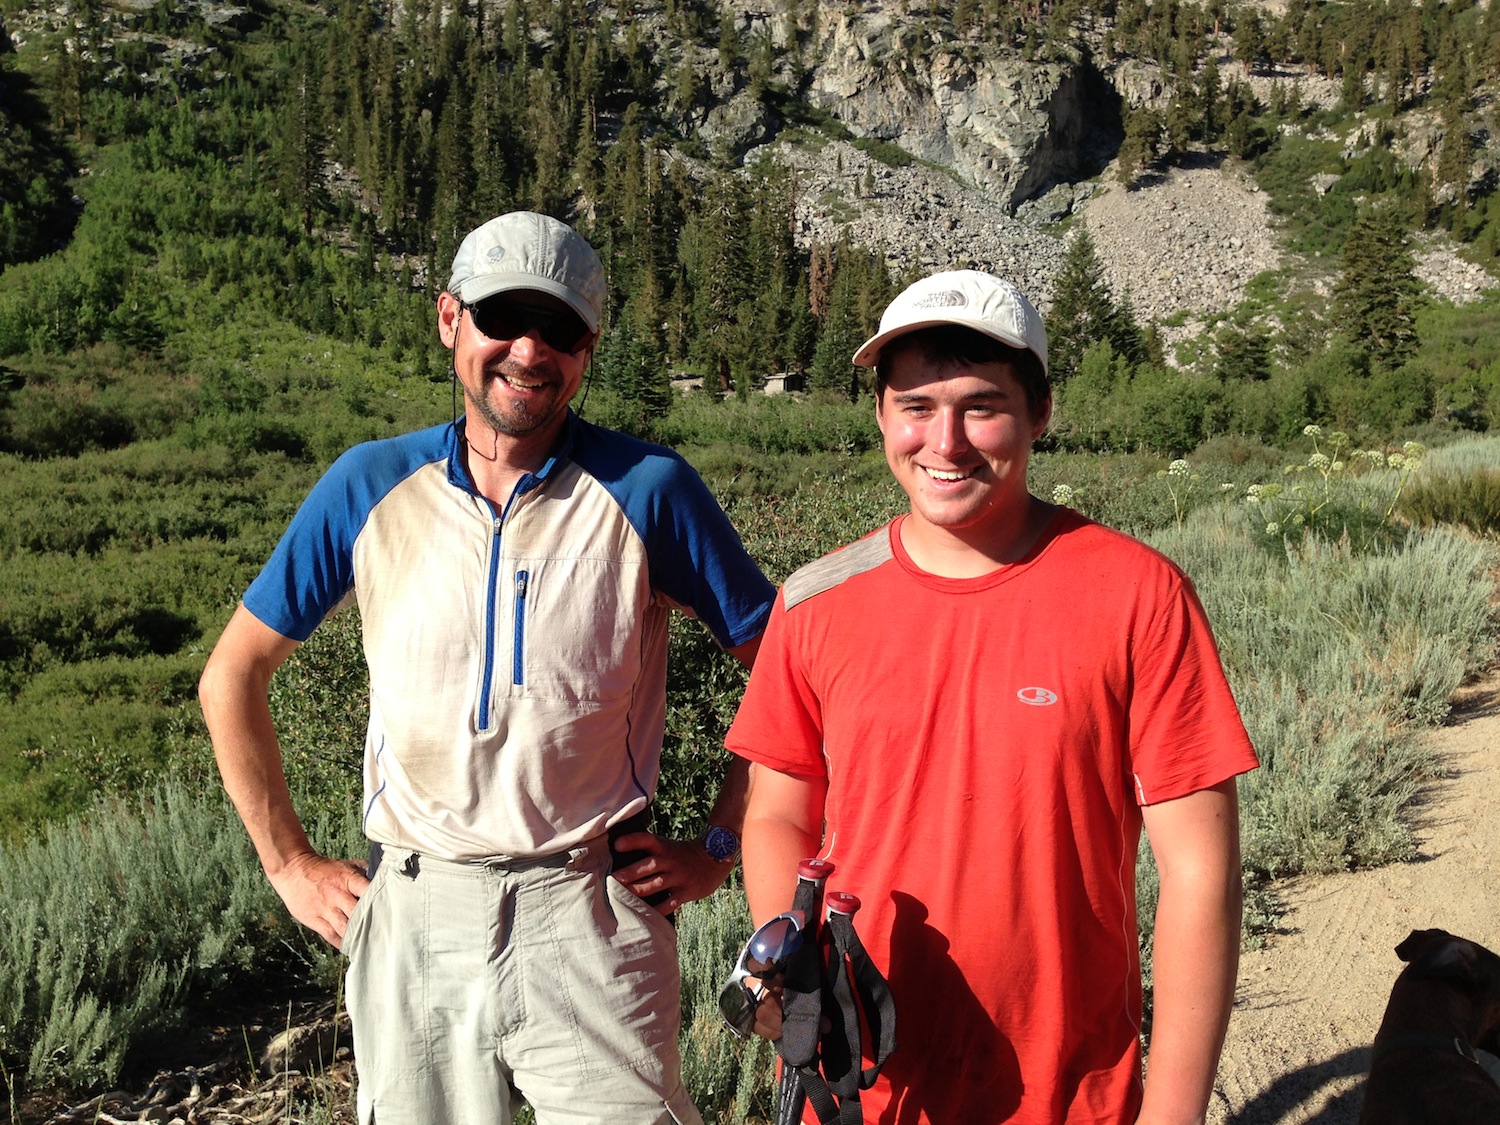 JMT demons Peter and Damian from Wisconsin. The father-son duo have done the JMT 20 times between them.